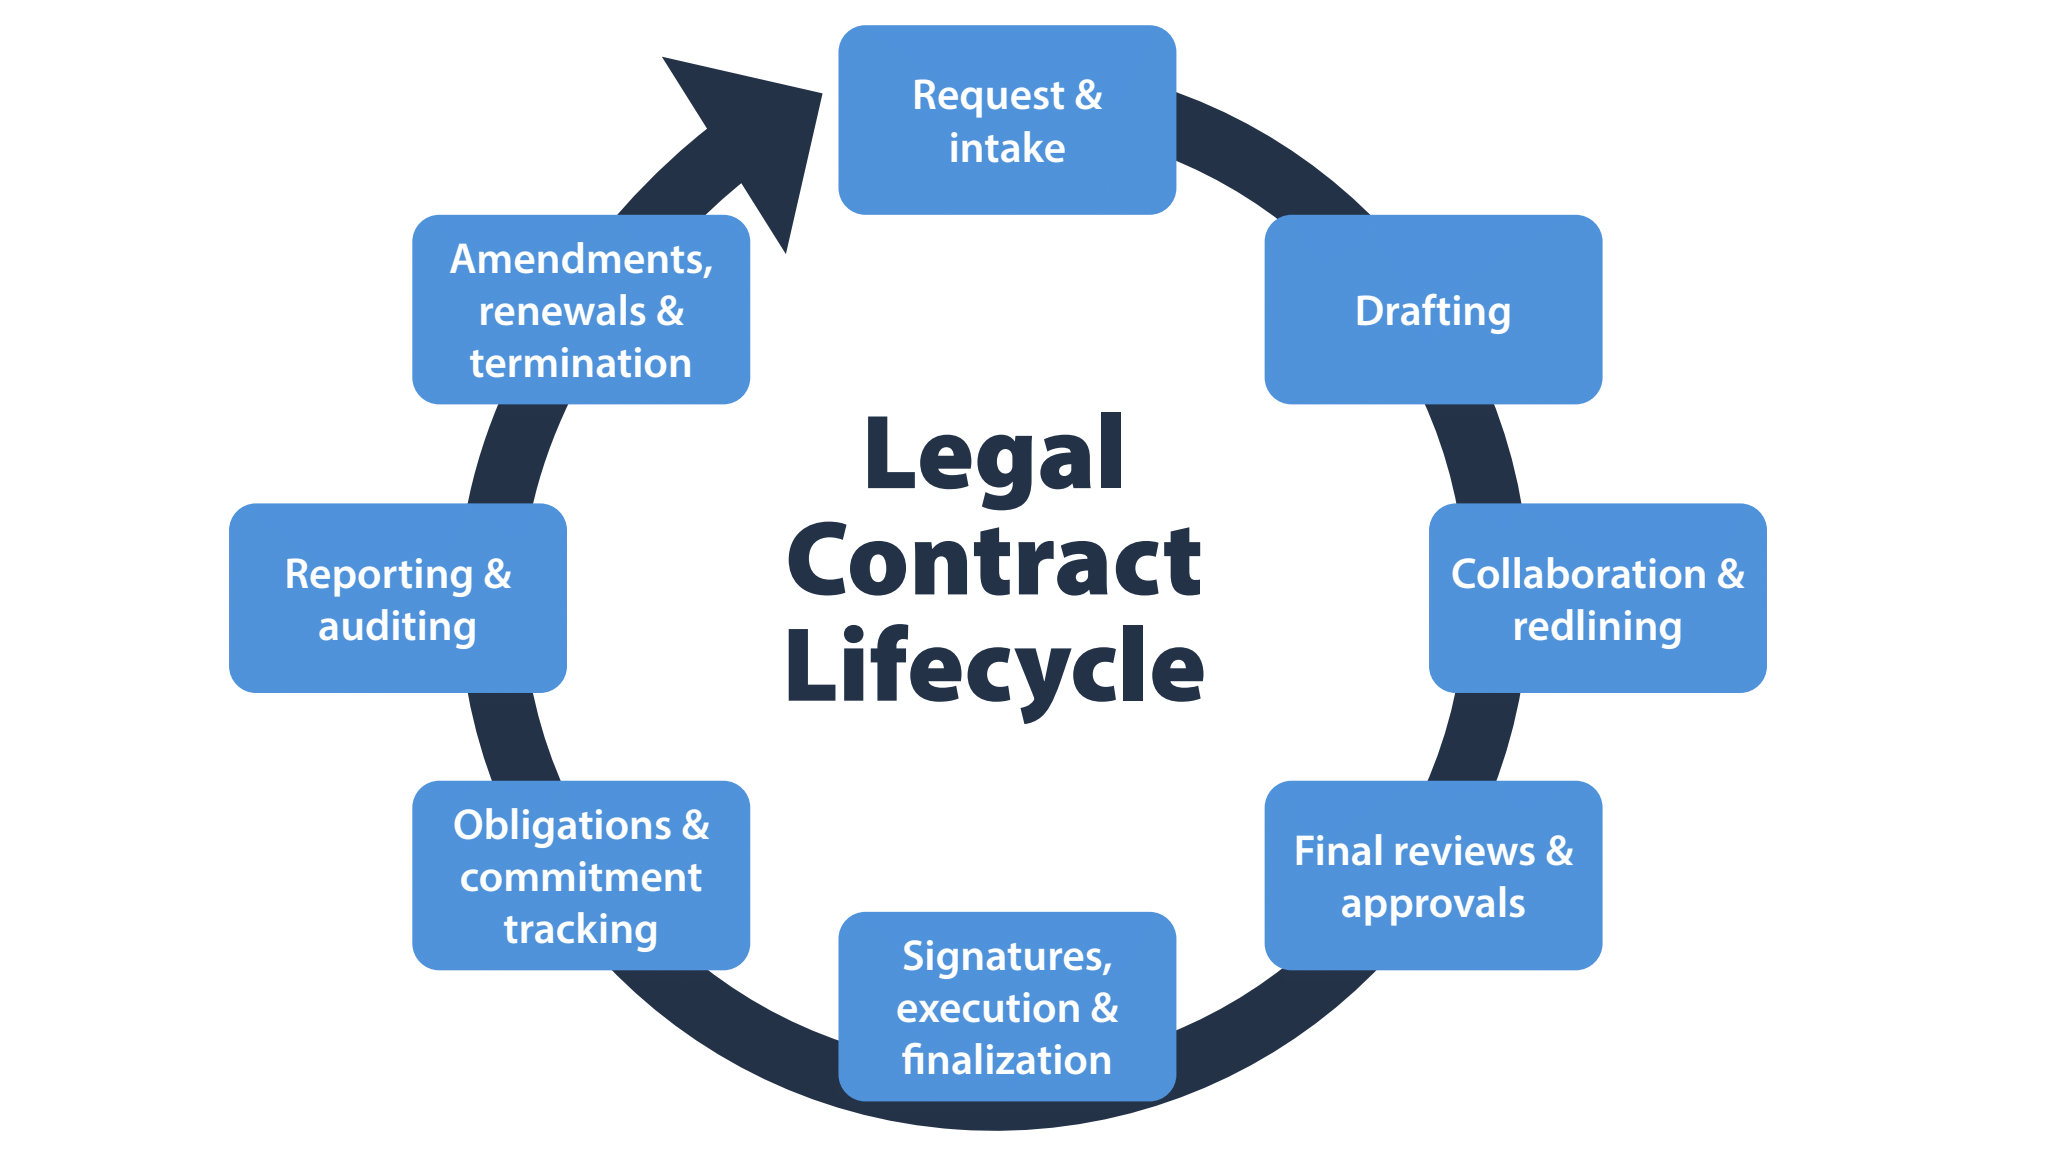 The steps in the legal contract lifecycle